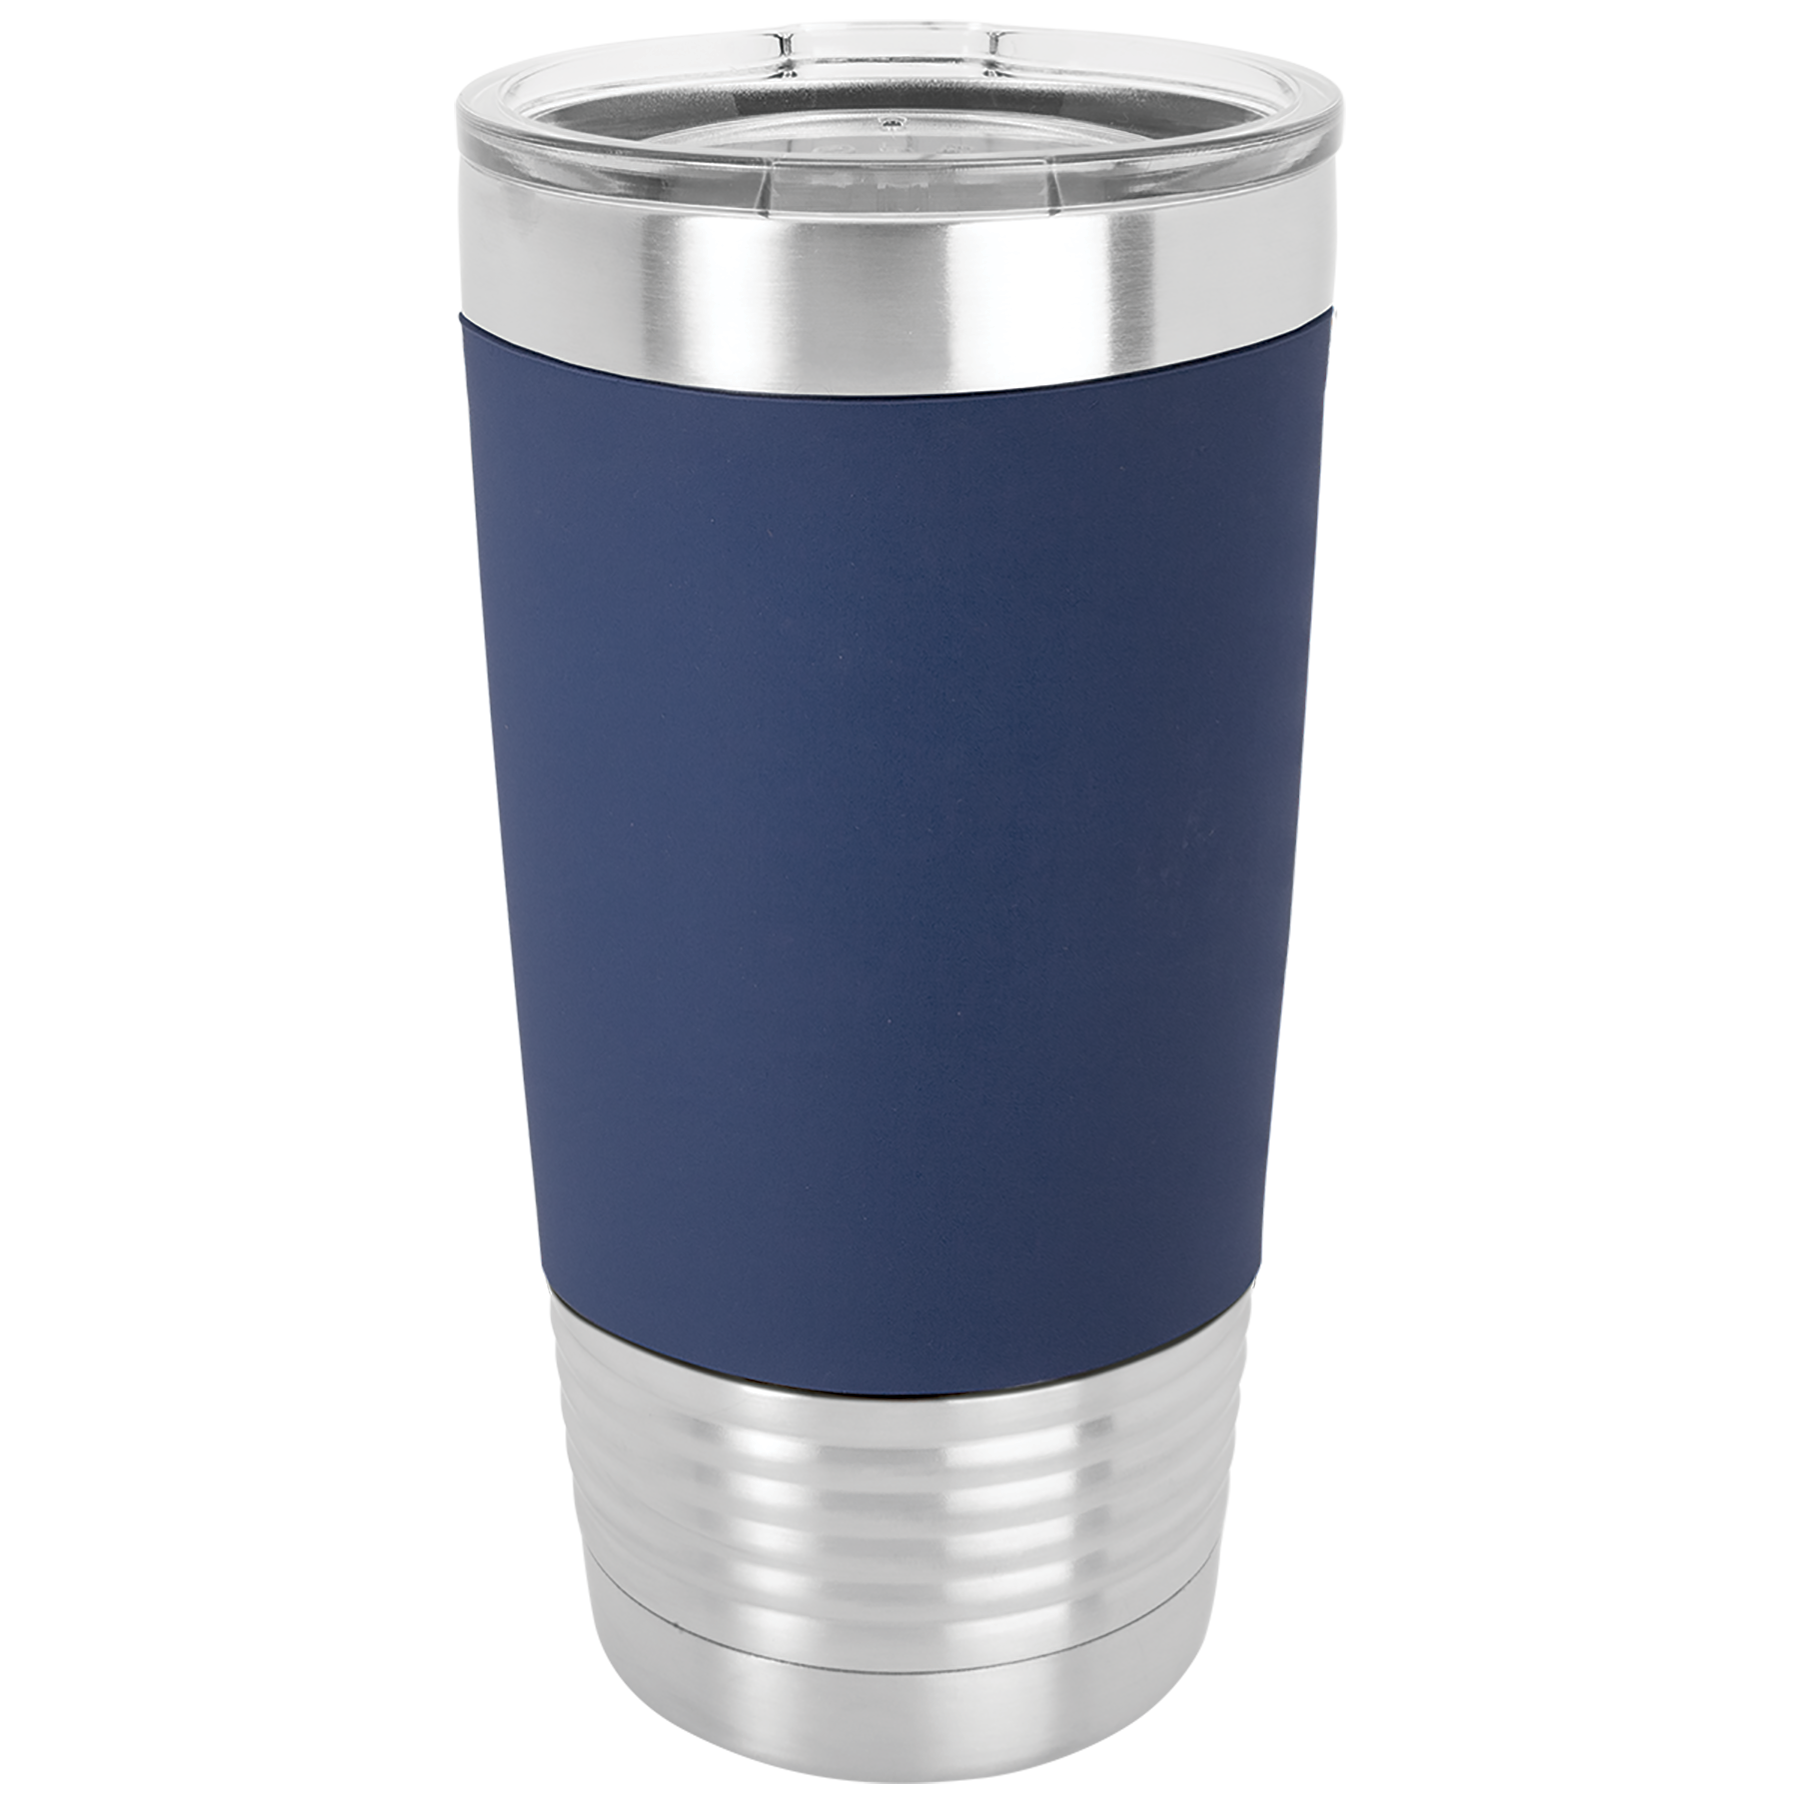 Fishing – Engraved Polar Camel Stainless Steel Tumbler, Stainless Cup,  Gifts For Him – 3C Etching LTD